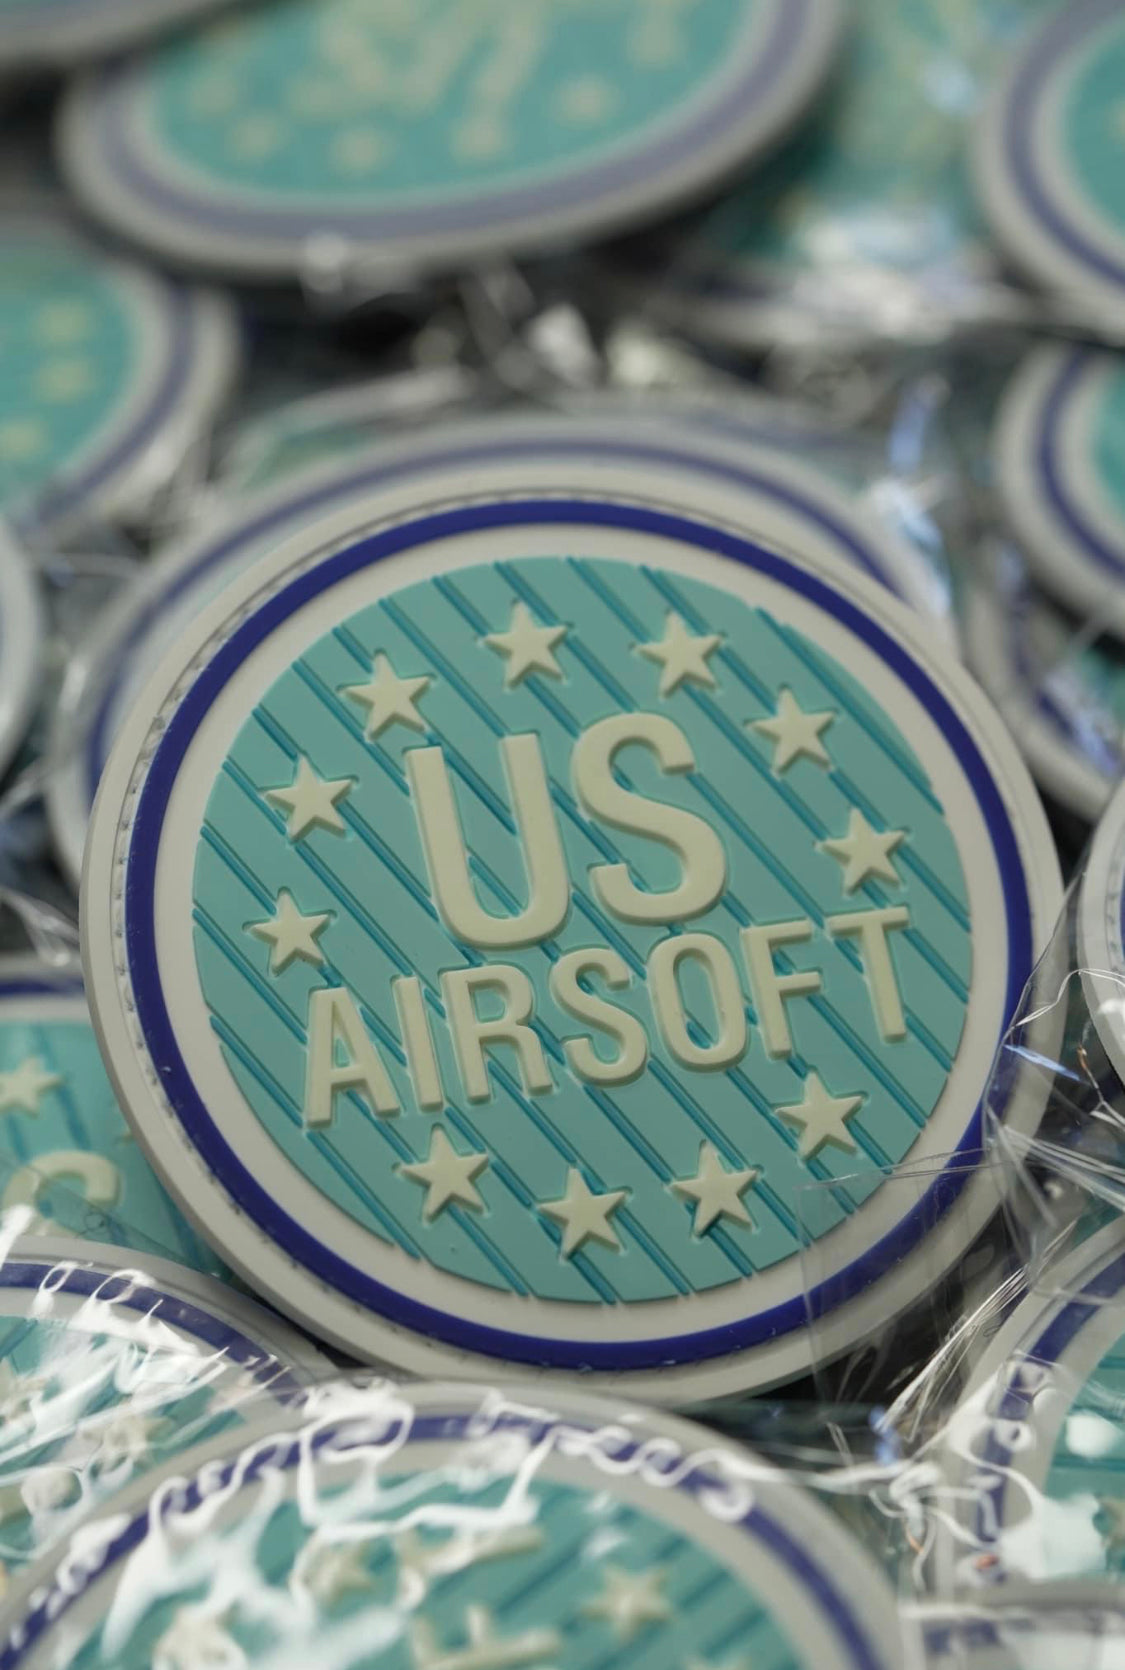 US Airsoft Glow in the dark Patch - ssairsoft